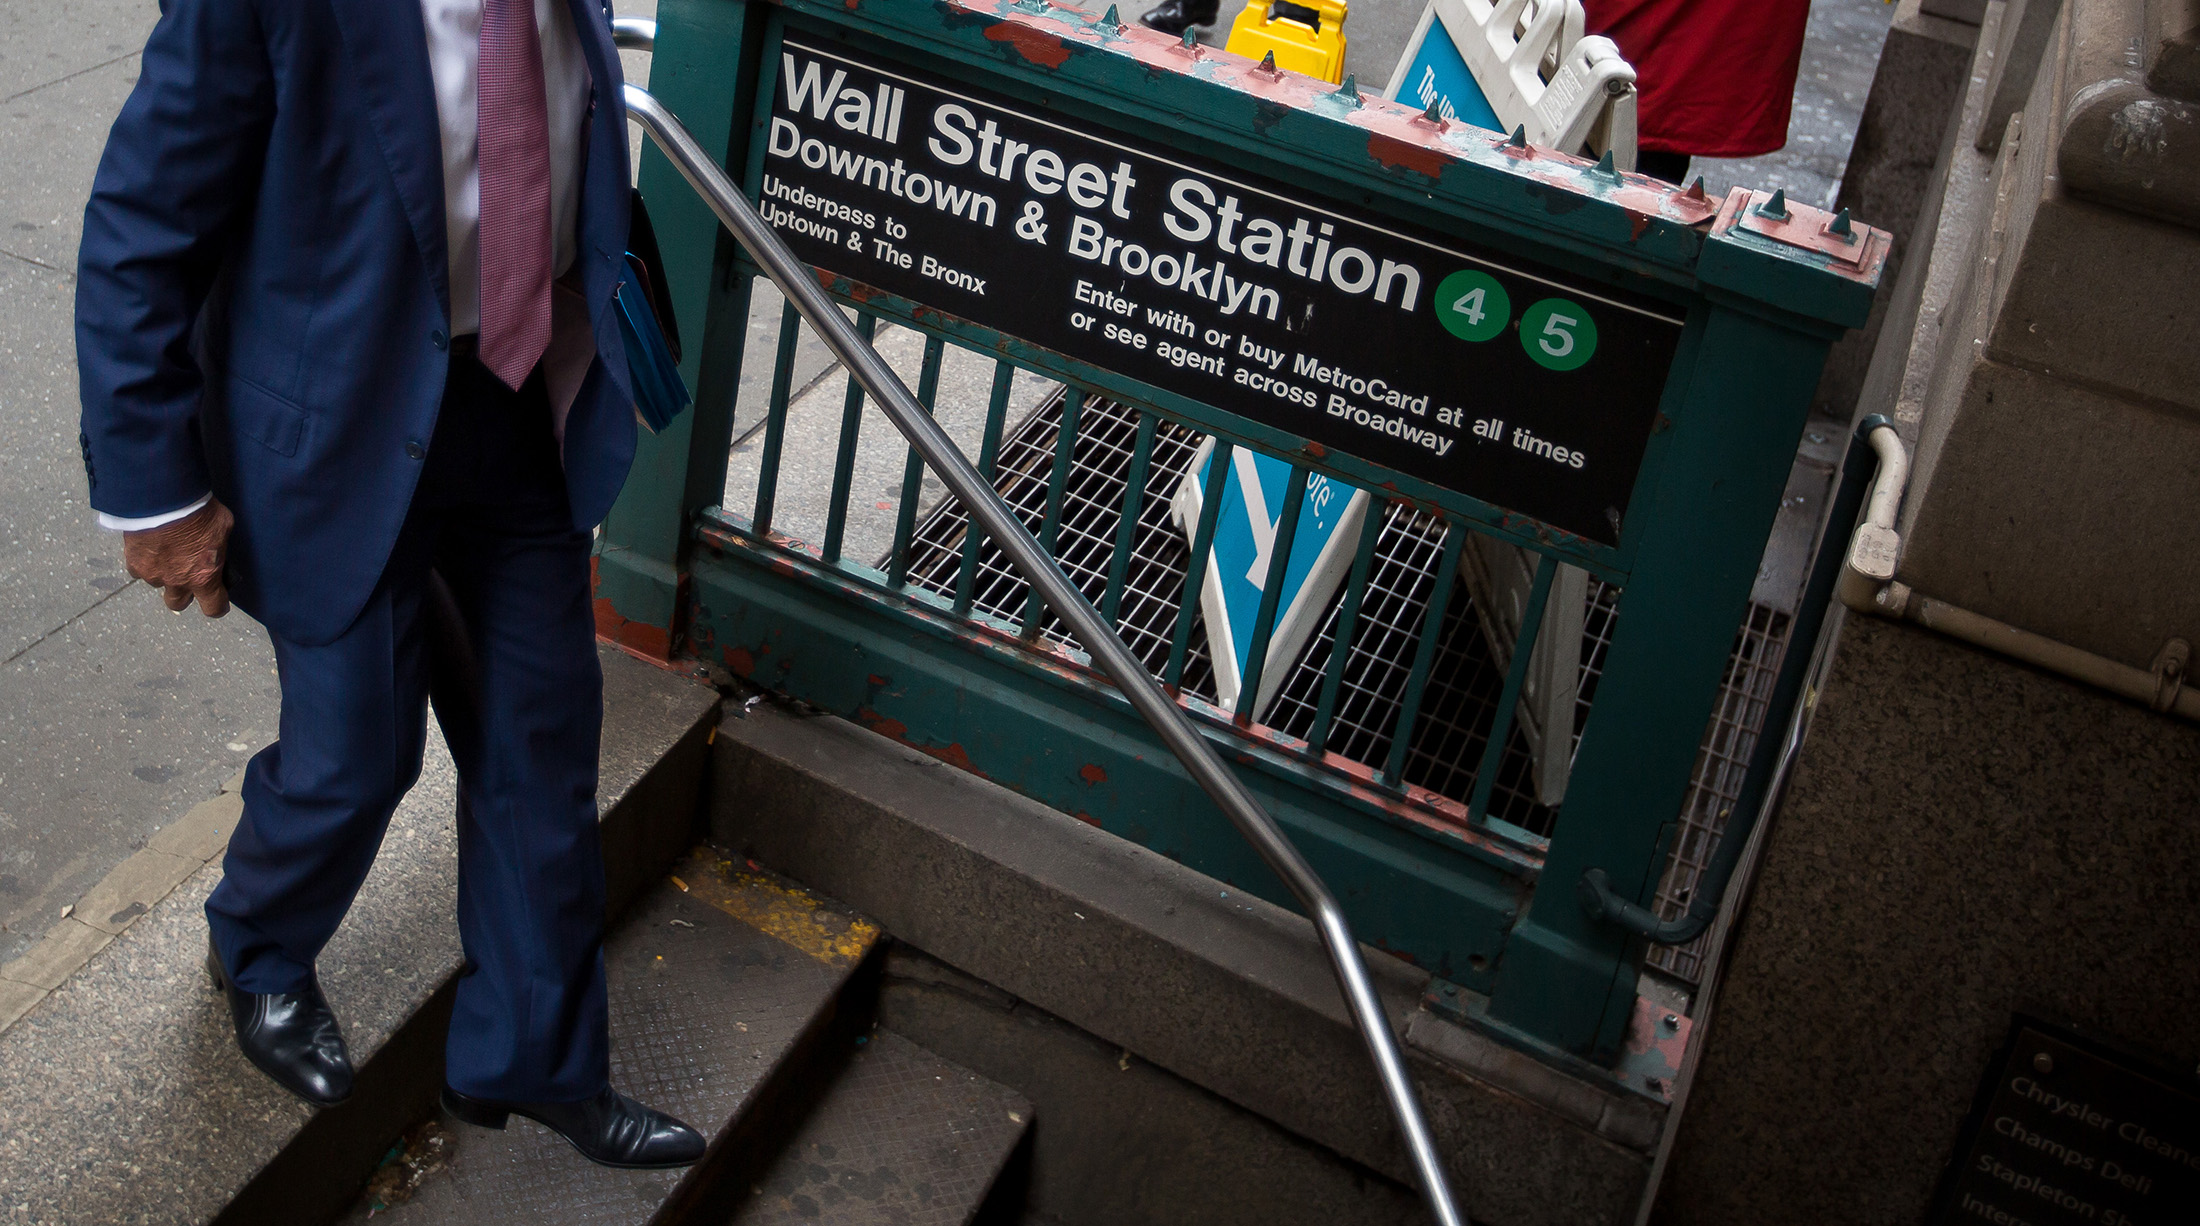 A man enters the Wall Street subway station near the New York Stock Exchange.
